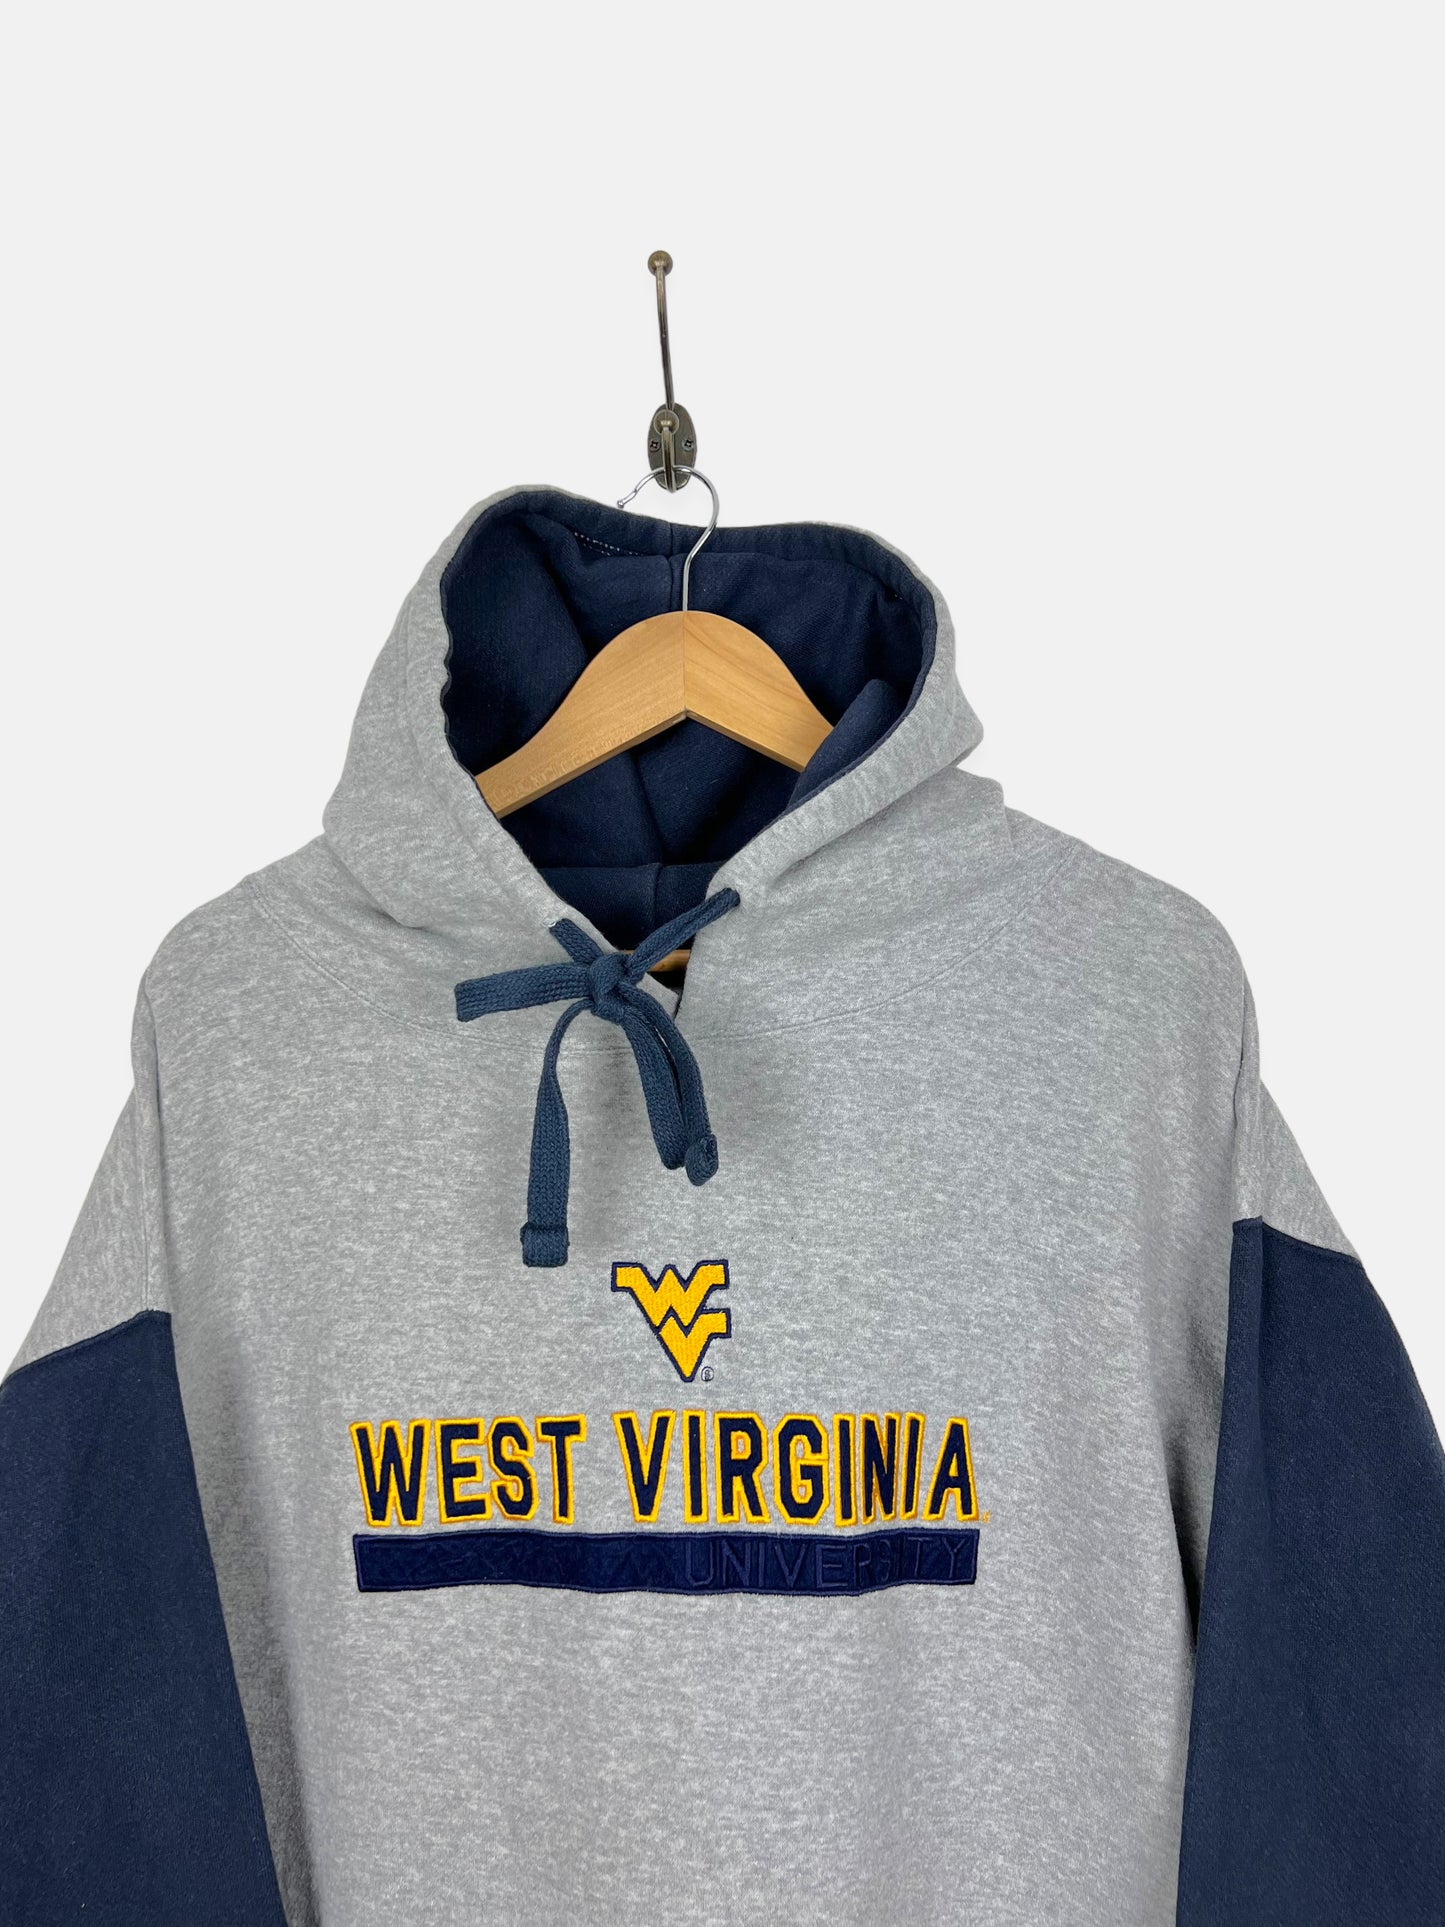 90's West Virginia University Embroidered Vintage Hoodie Size 2XL